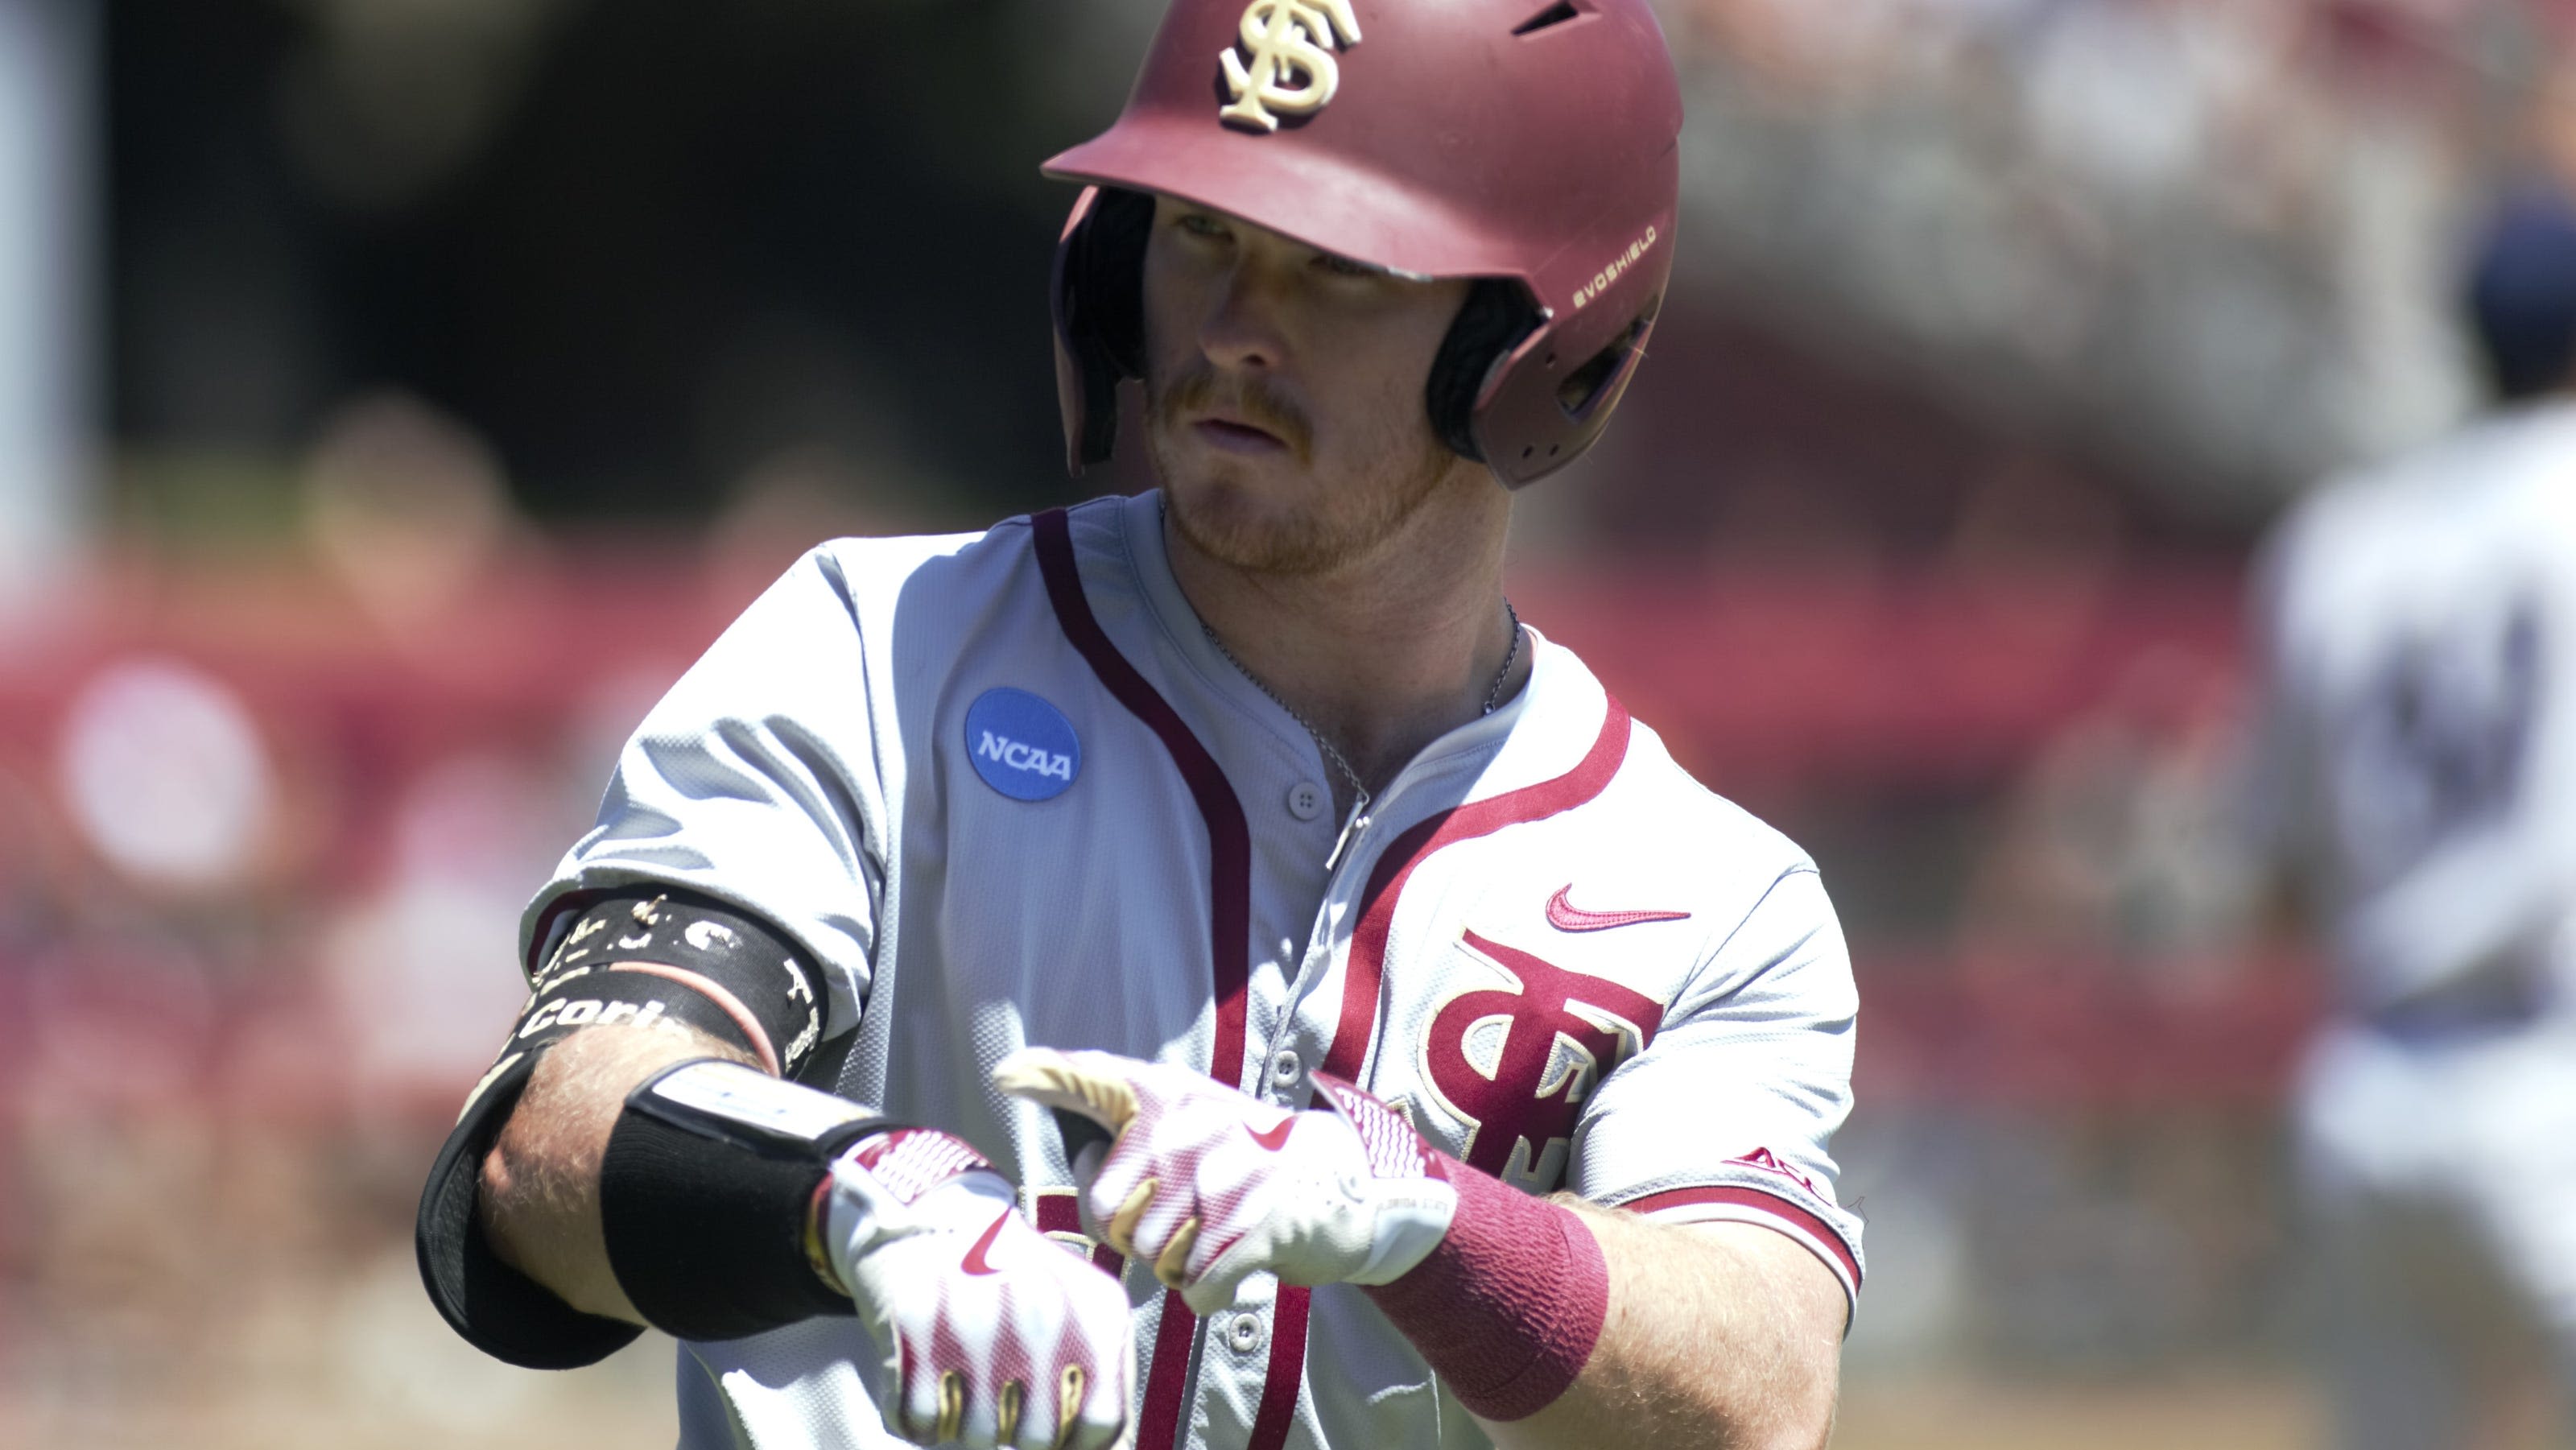 James Tibbs, Cam Smith lead group of FSU baseball players projected to go in MLB draft